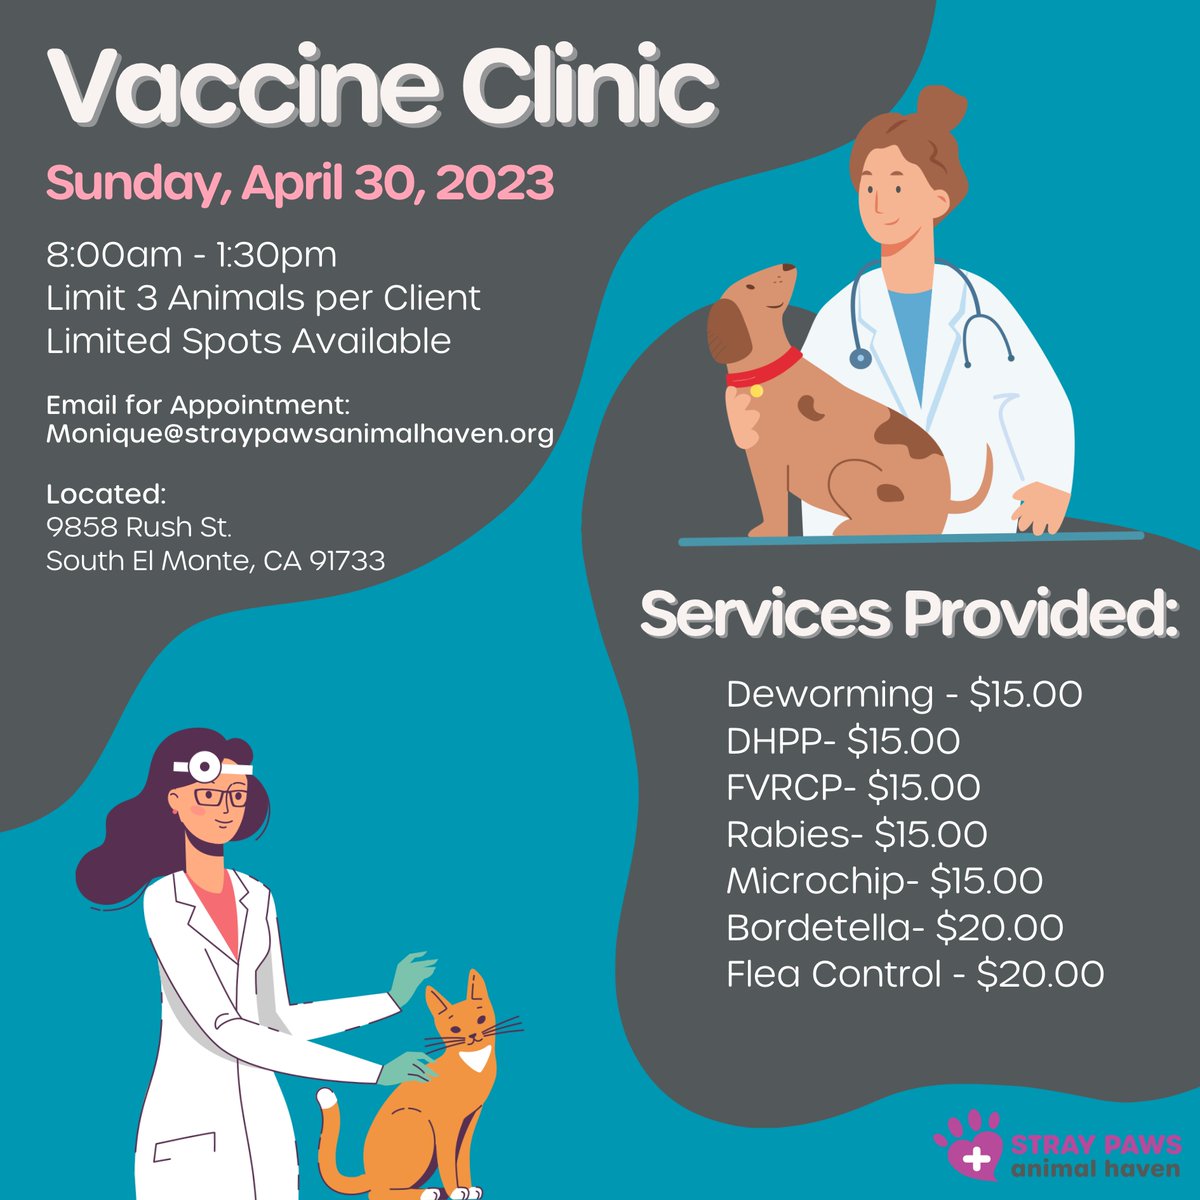 Join us for our Vaccine Clinic on Sunday, April 30th, 2023 from 8:00am -  1:30pm to get your pet Vaccinated: This clinic is open to residents outside the  El Monte area. 
#straypaws #vaccineclinic #microchip #catsofinstagram #fleacontrol #discountedvaccineforpets #petclinic